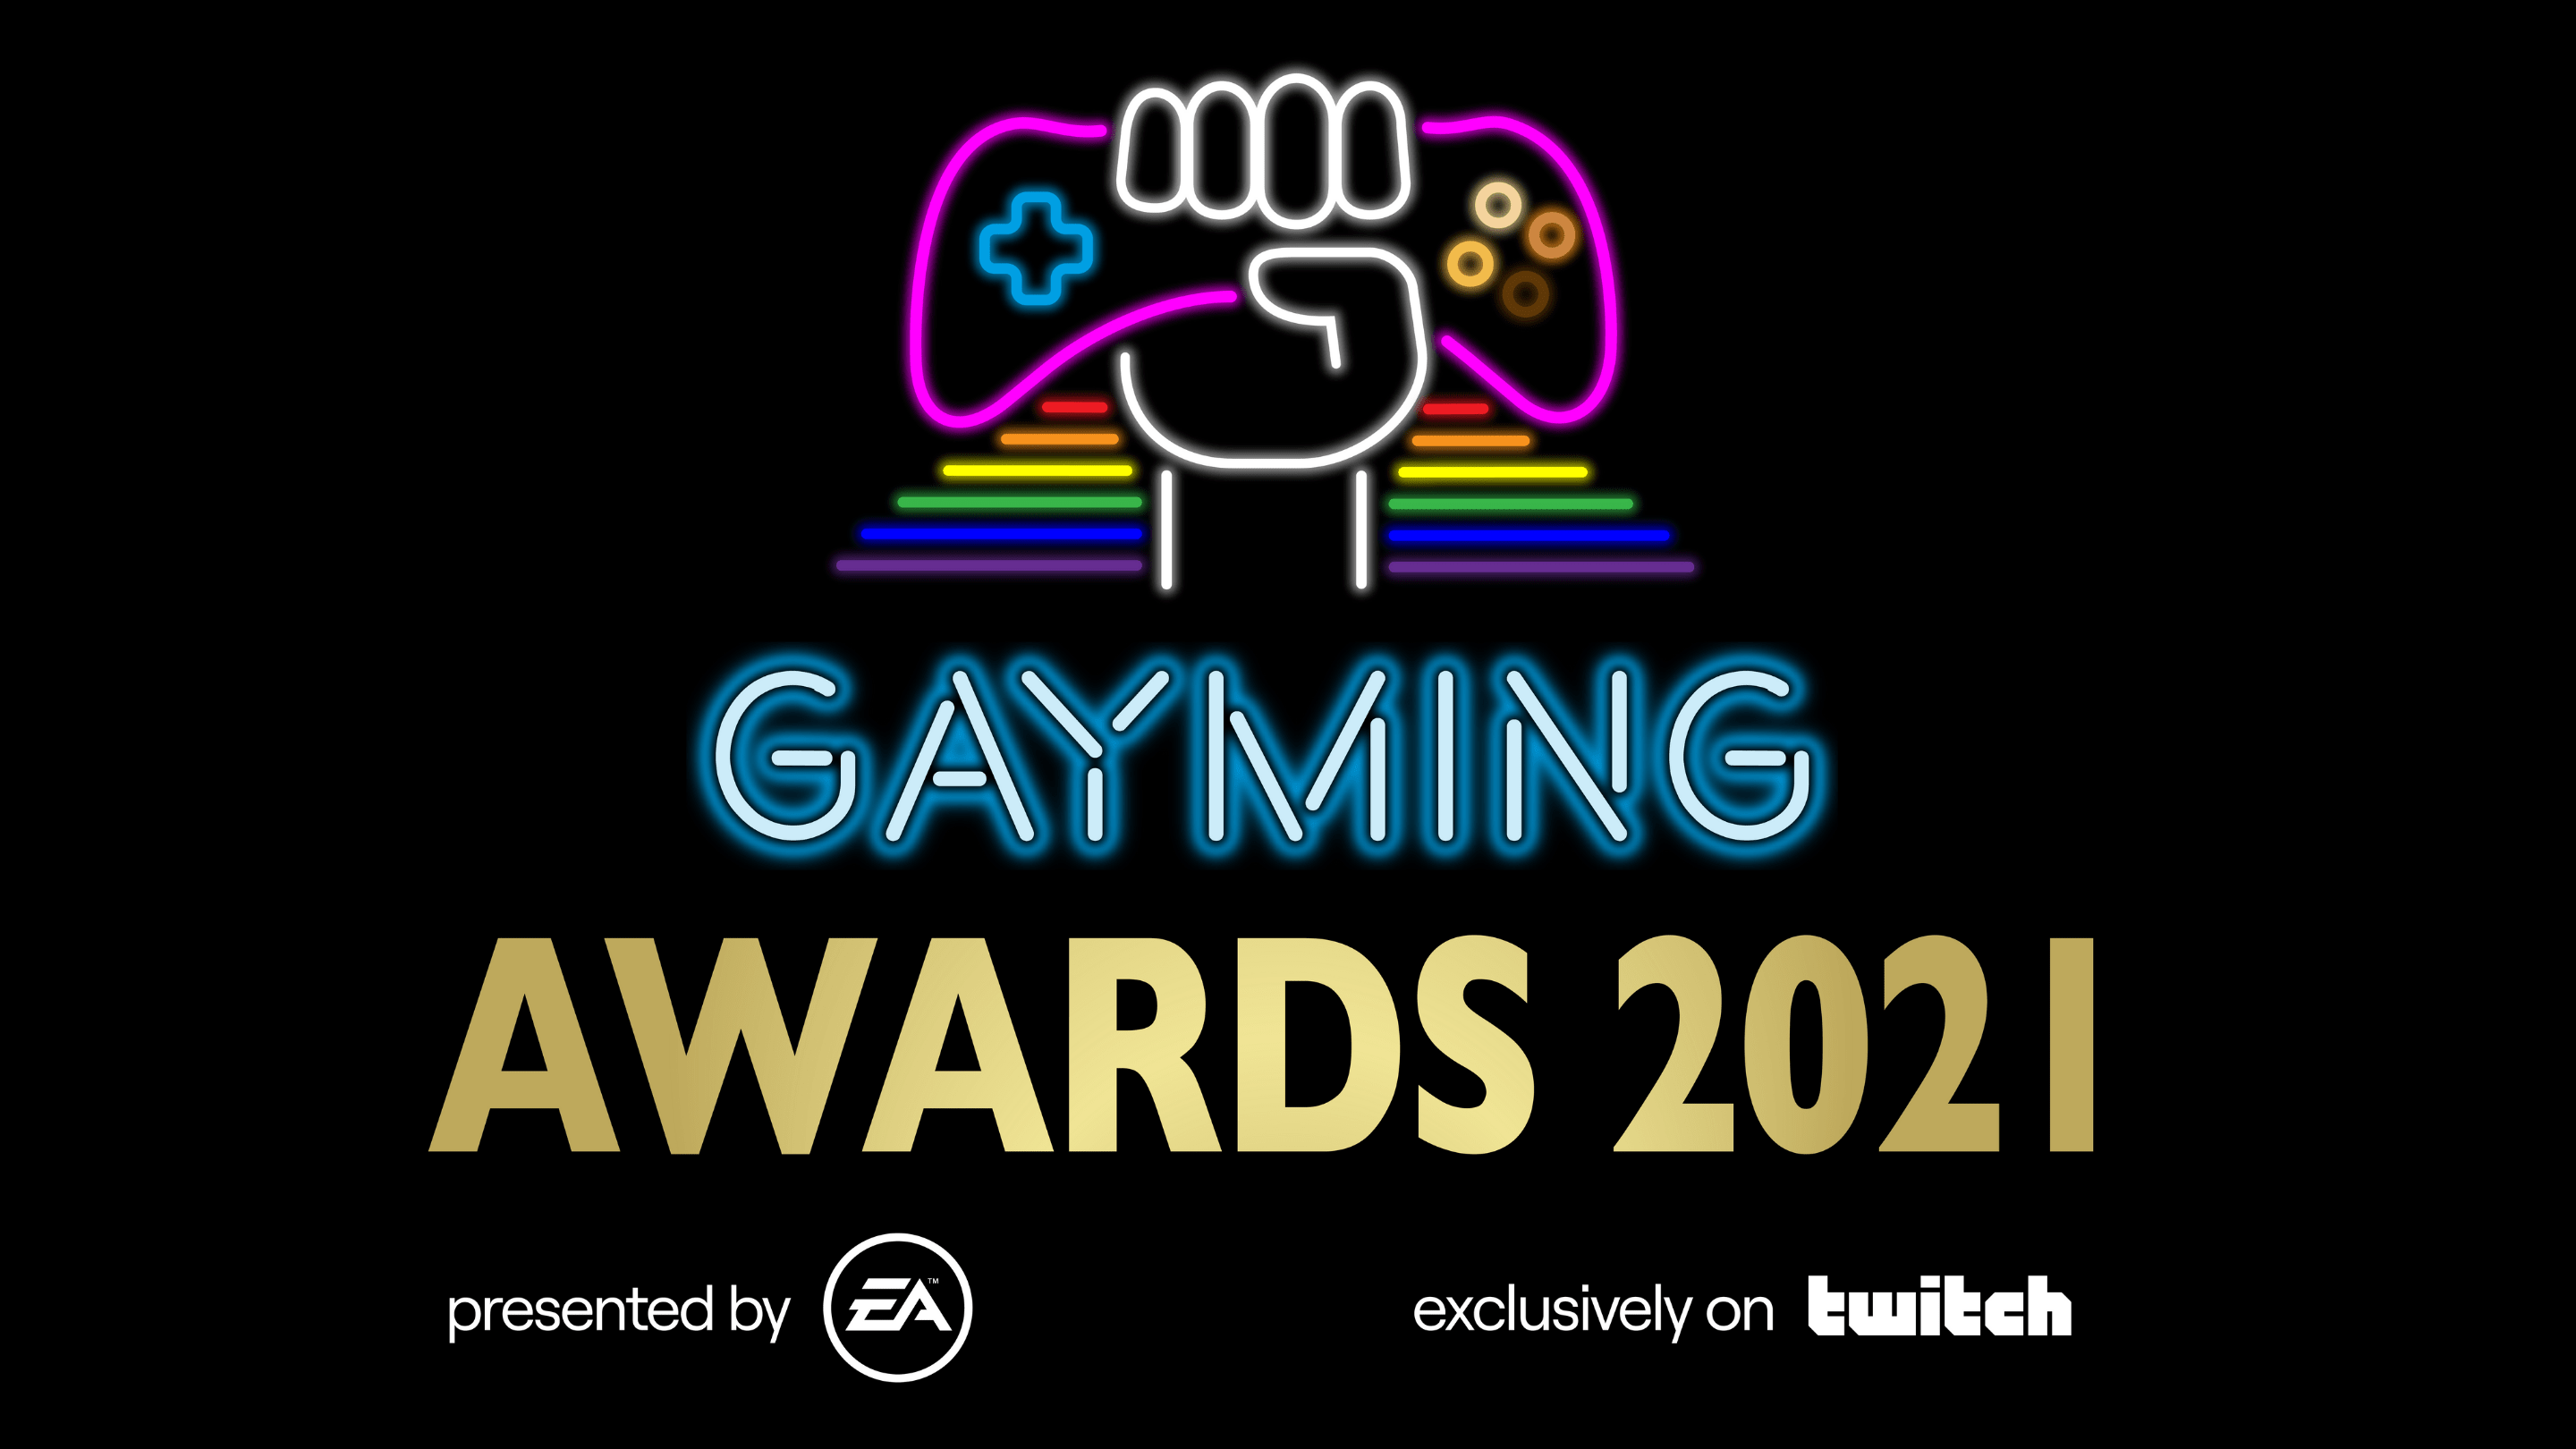 The Last of Us Part 2 and Hades Lead the Game of The Year Nominees -  Gayming Magazine